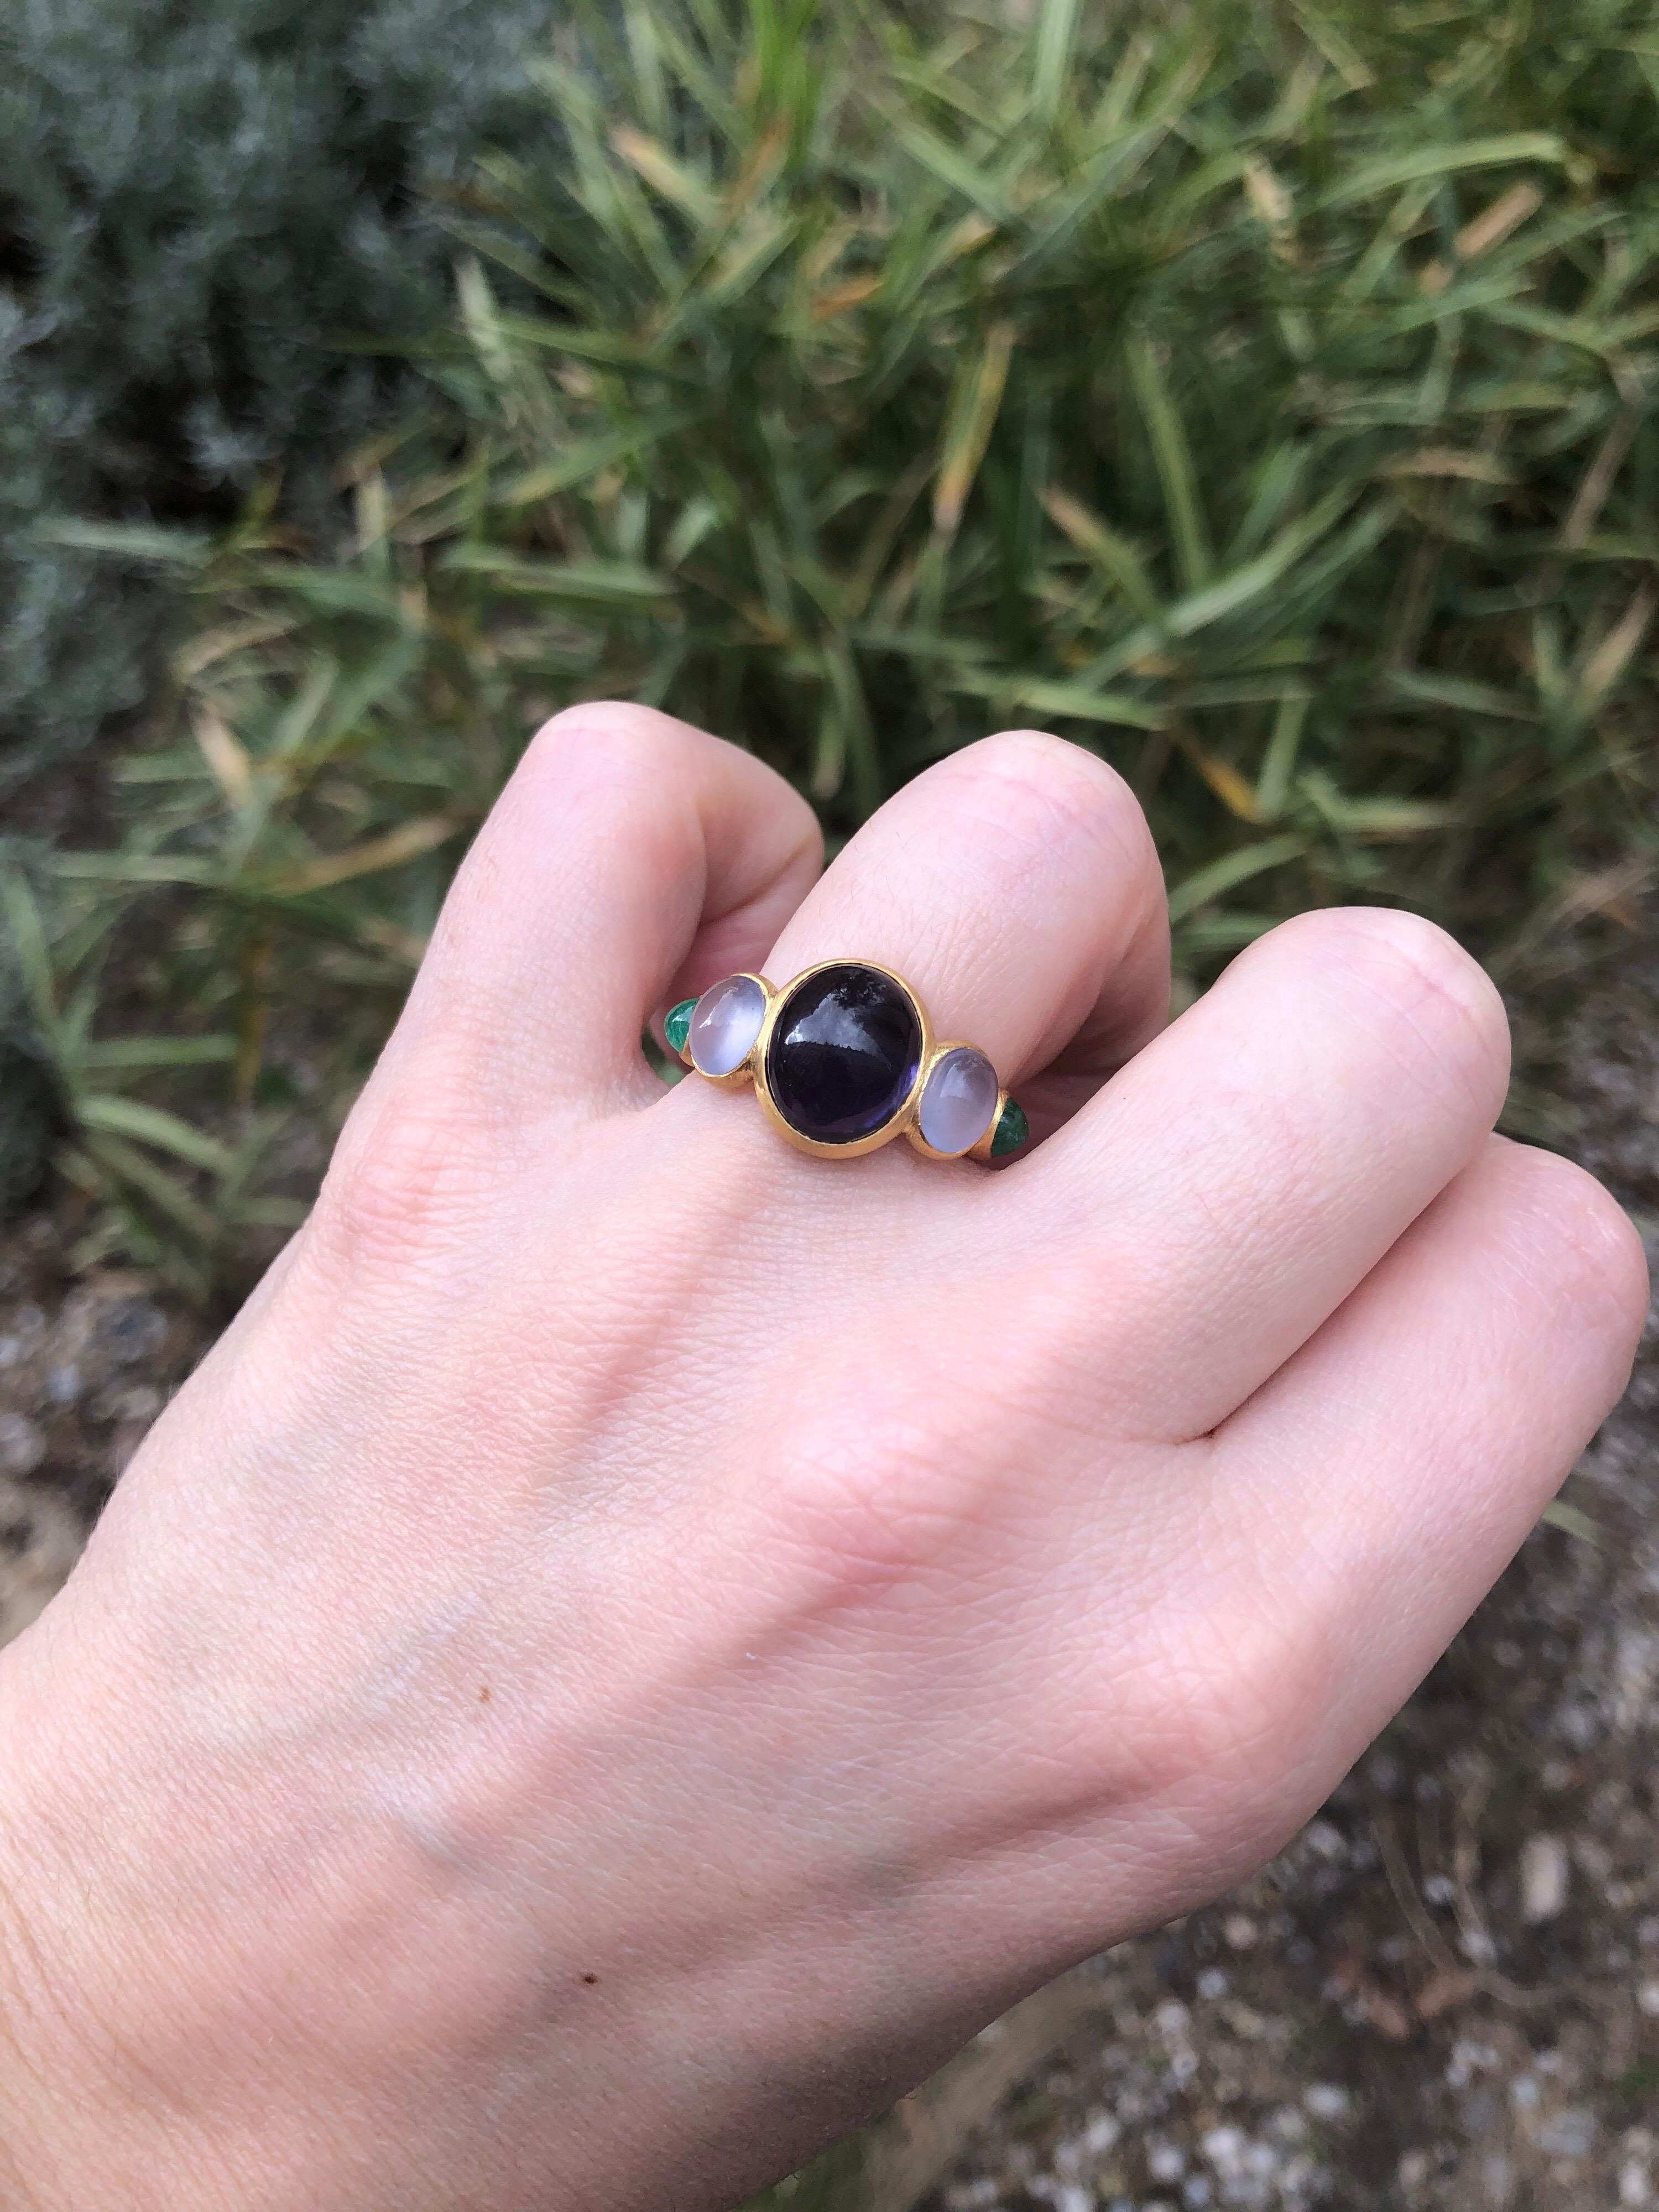 This delicate ring is composed of 5 stones in line: 1 deep blue iolite cabochon, 2 natural blue chalcedony cabochons and 2 emerald pear cabochons. The center stone is an iolite of 4.17 cts and the 2 blue chalcedony have a total weight of 1.94 cts.